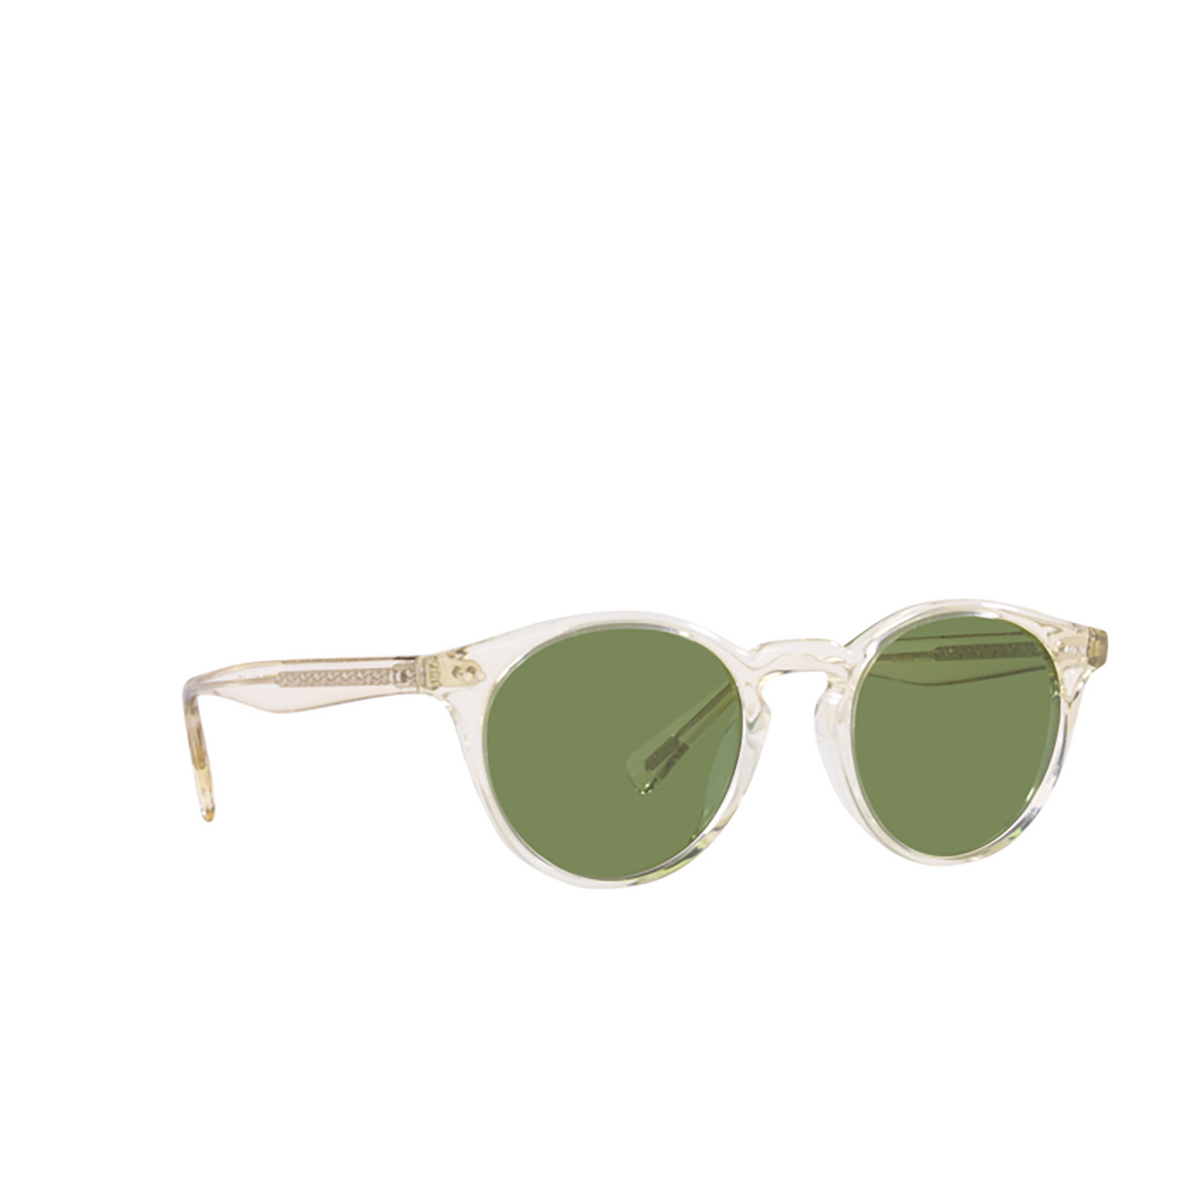 Oliver Peoples ROMARE Sunglasses 1692O9 Pale Citrine - three-quarters view